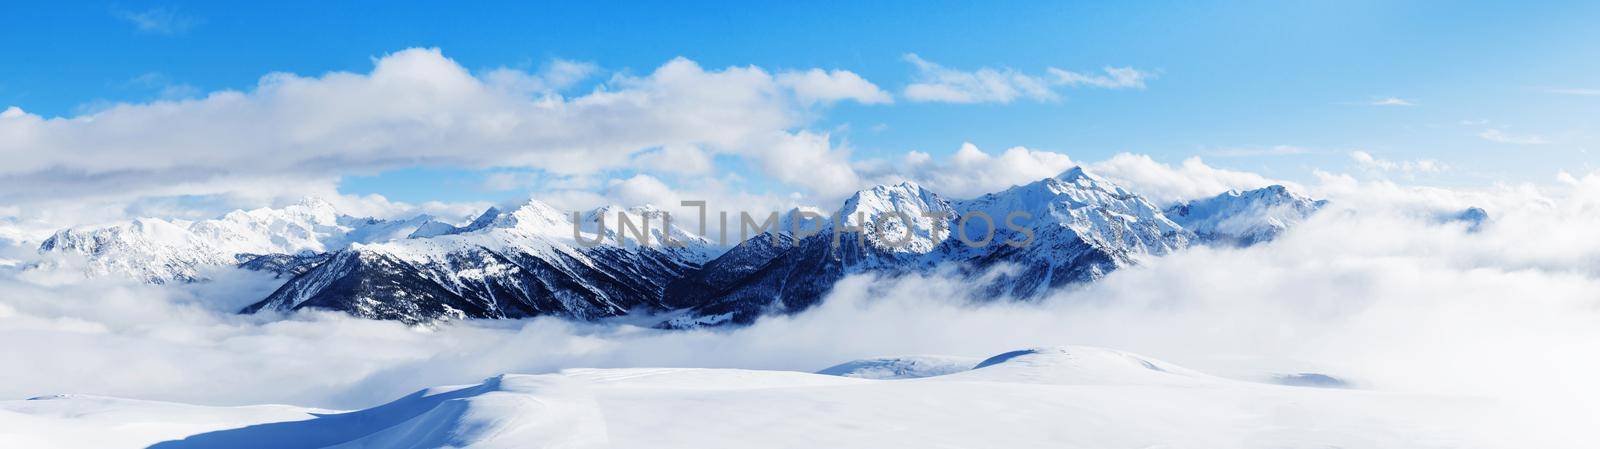 Panoramic view of mountains near Brianson, Serre Chevalier resort, France. Ski resort landscape on clear sunny day. Mountain ski resort. Snow slope. Snowy mountains. Winter vacation. by photolime